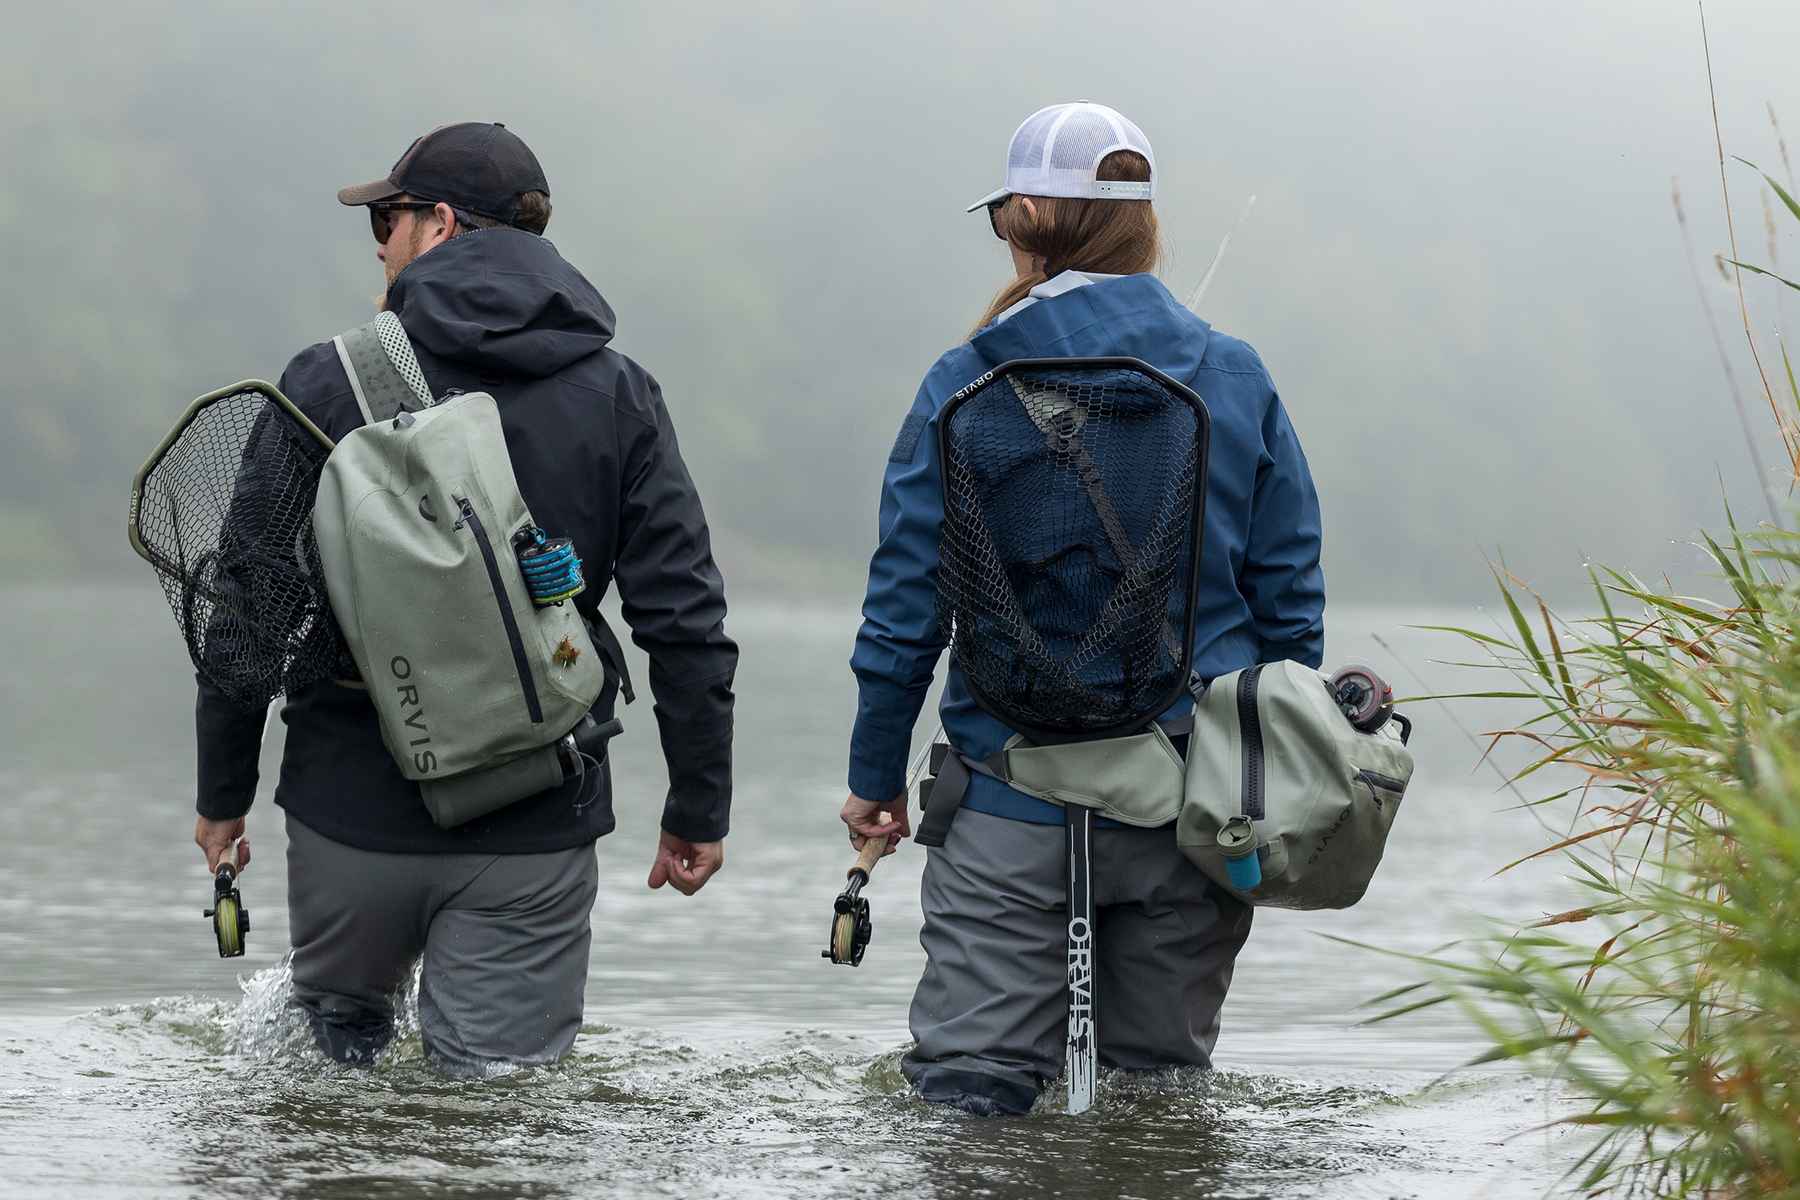 The Best New Fly Fishing Packs, Wading Boots, and Apparel